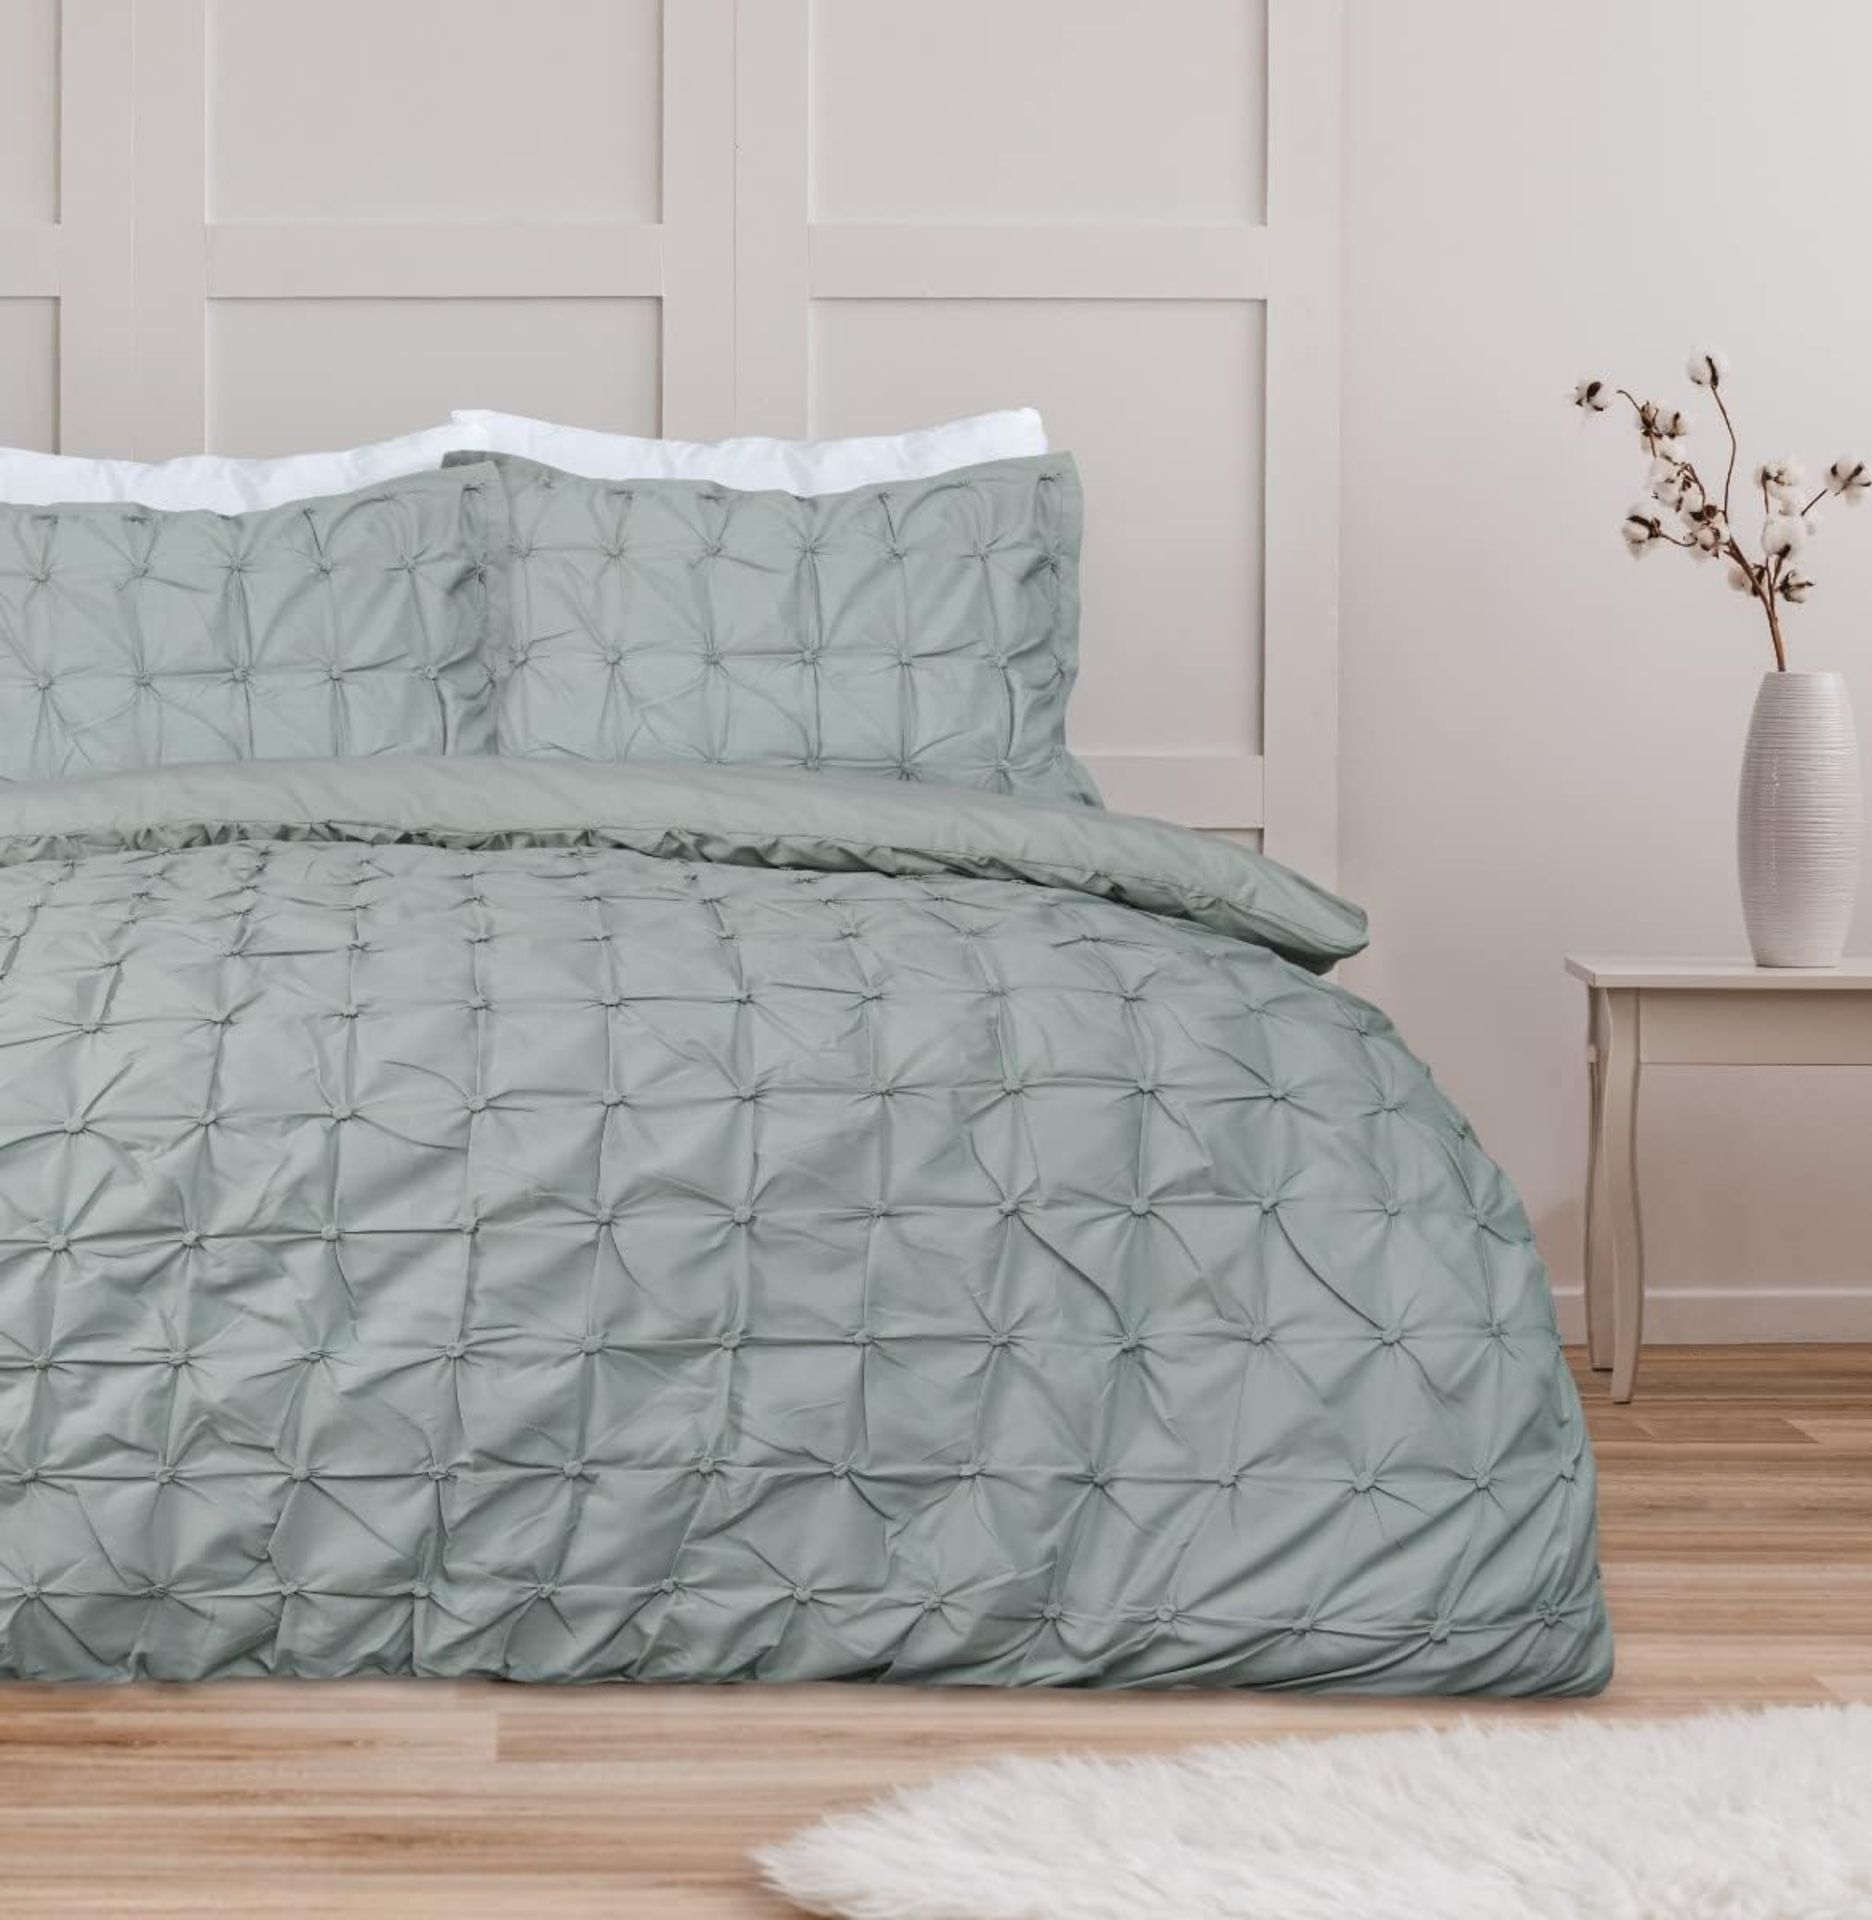 11x NEW & PACKAGED SLEEPDOWN Rouched Easy Care SINGLE Duvet Set - SAGE GREEN. RRP £22.99 EACH. (R7- - Image 3 of 7